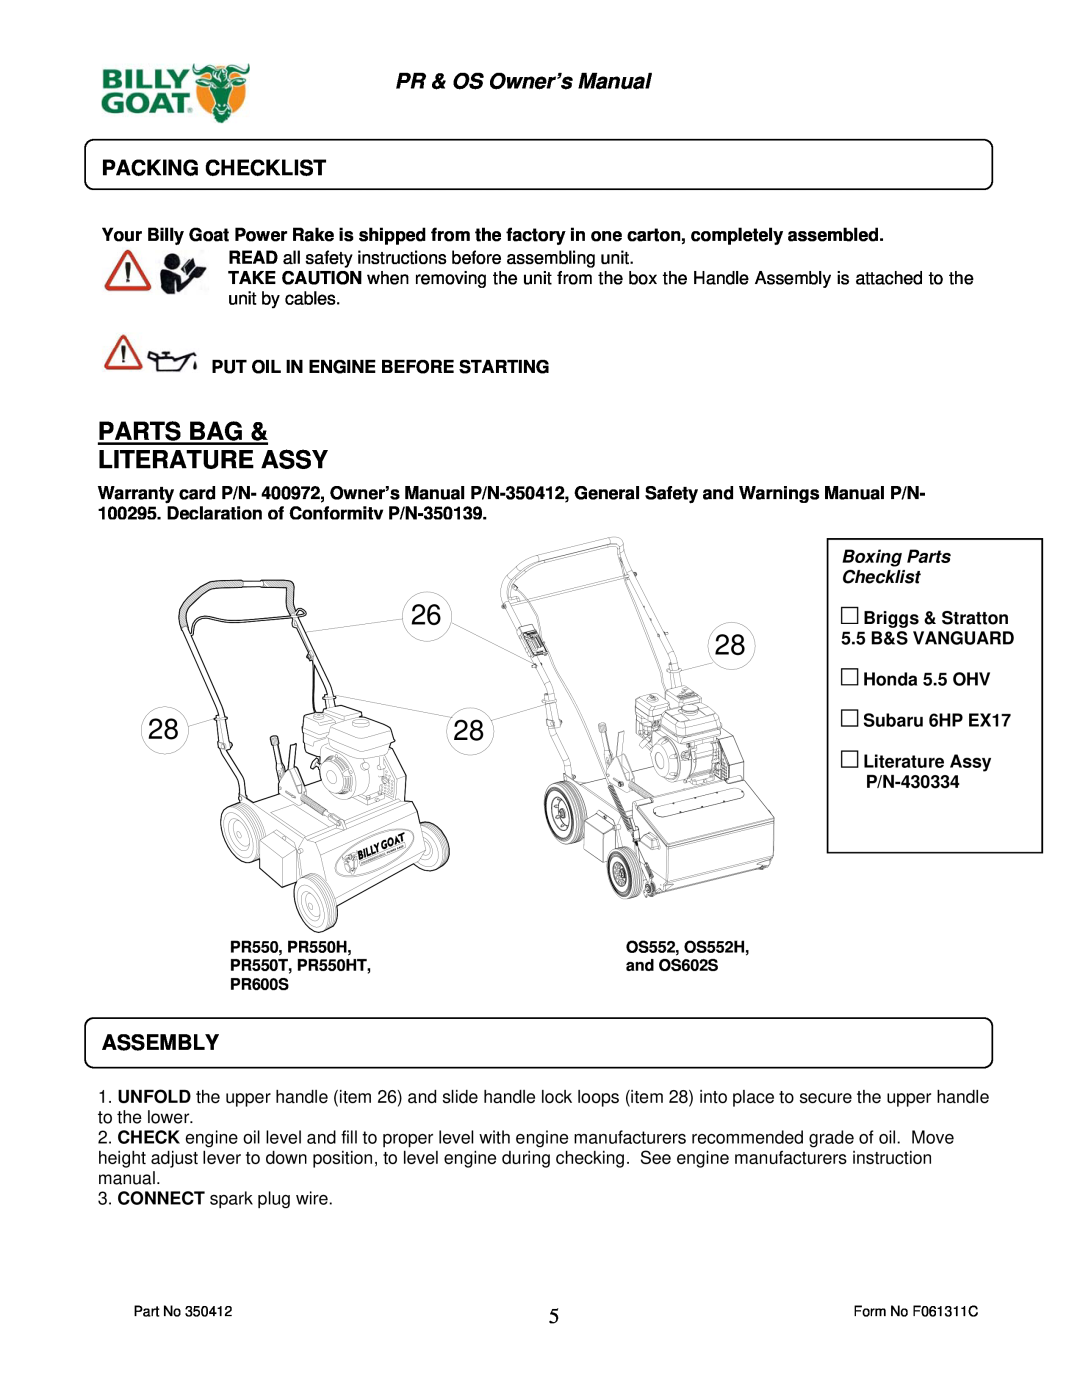 Billy Goat PR550H, OS552H owner manual Parts Bag & Literature Assy, Packing Checklist, Assembly, Boxing Parts Checklist 